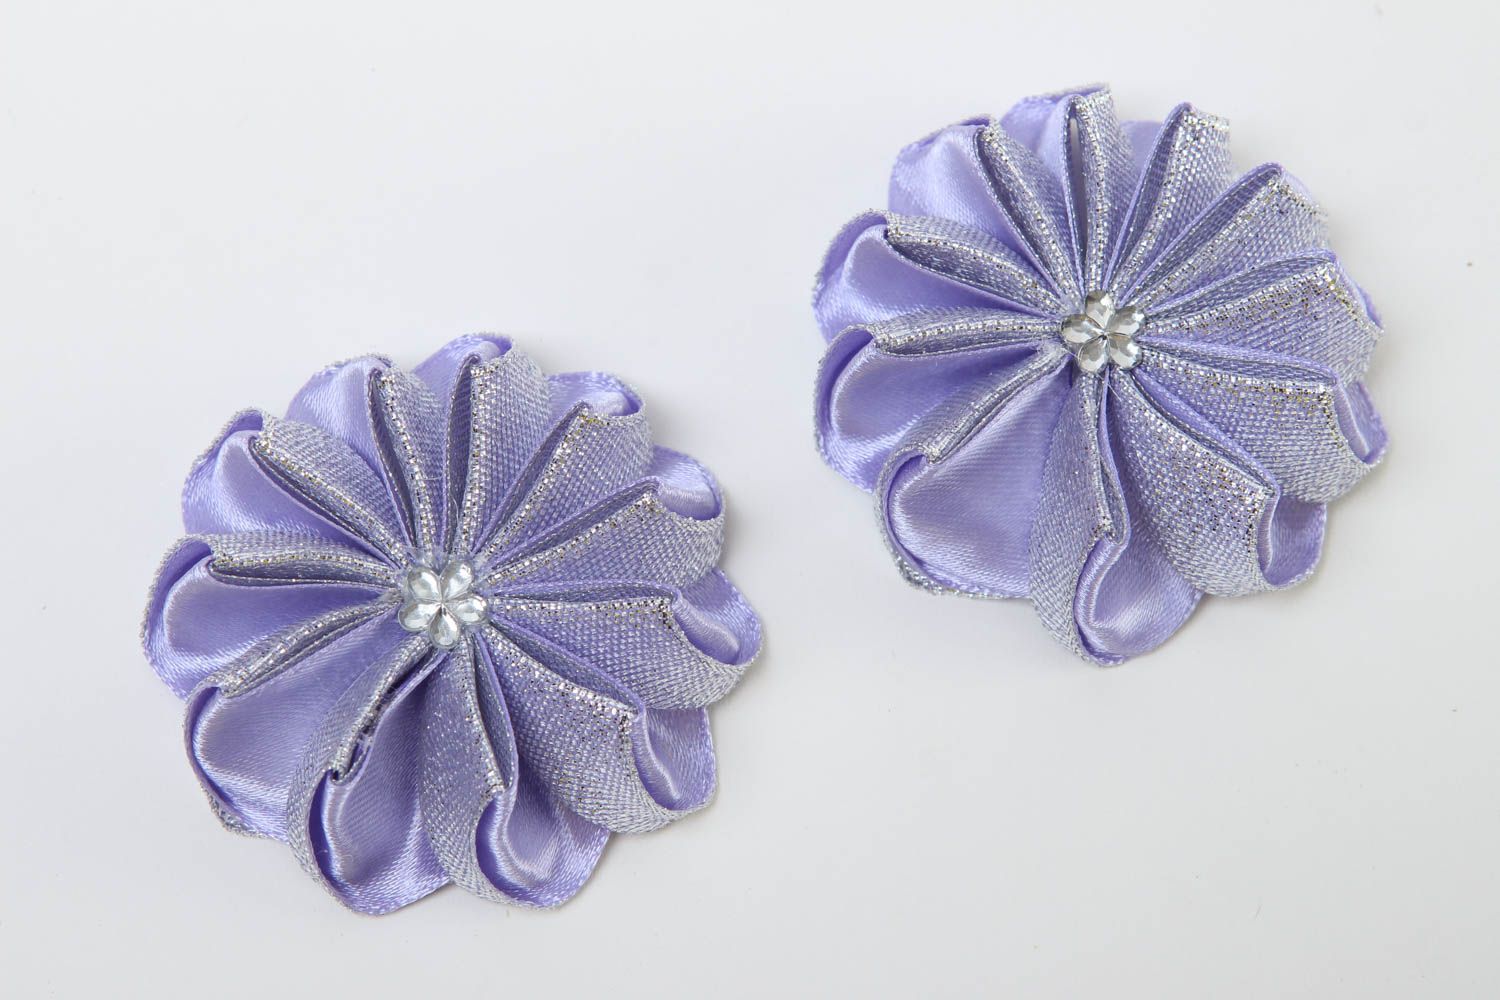 Satin ribbon flower fabric flowers kanzashi style flowers fittings for jewelry photo 2